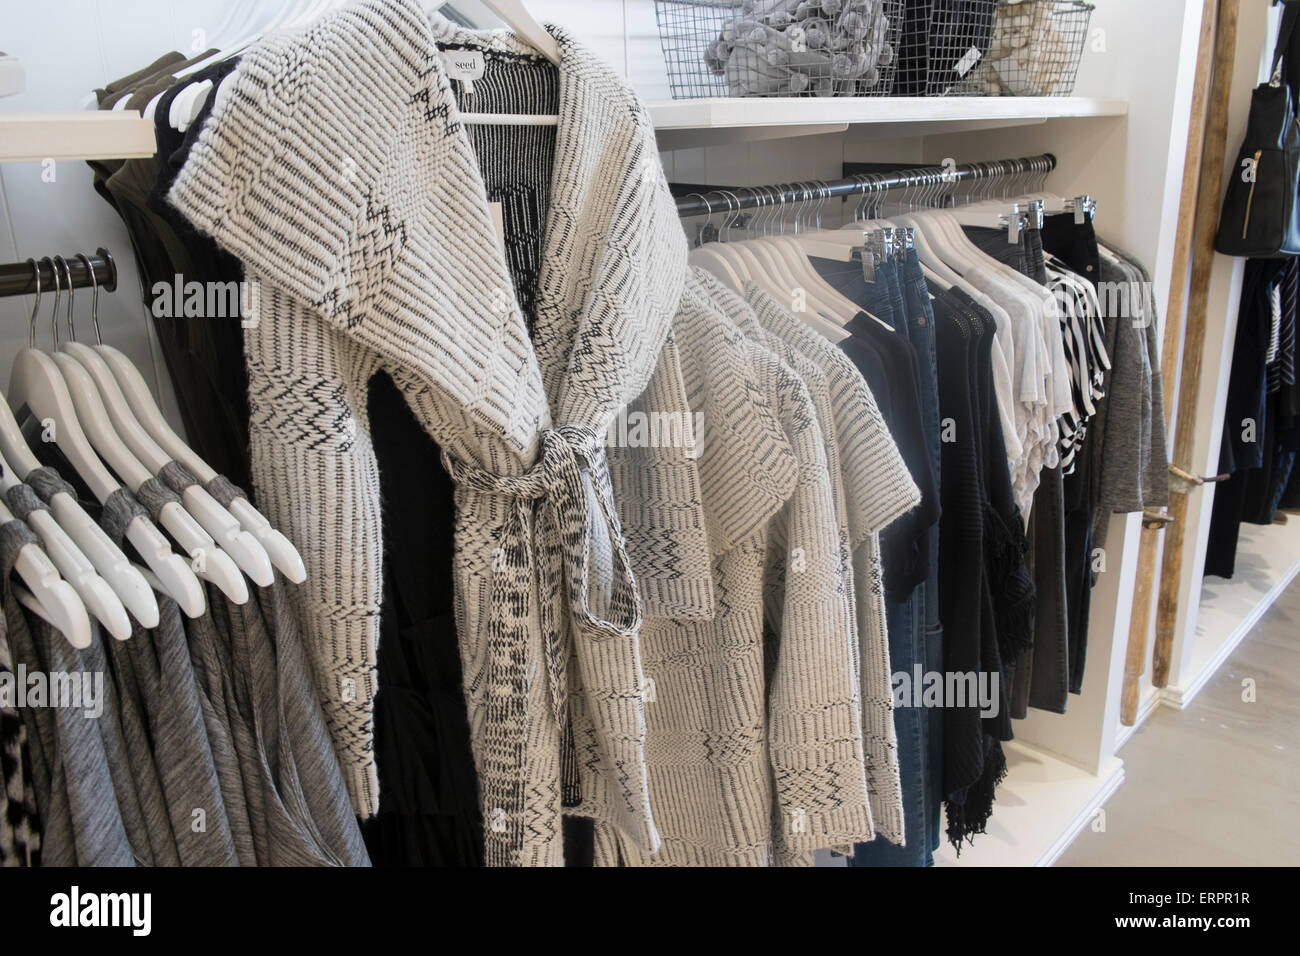 Seed, a womens ladies clothing fashion store in Sydney,Australia Stock Photo